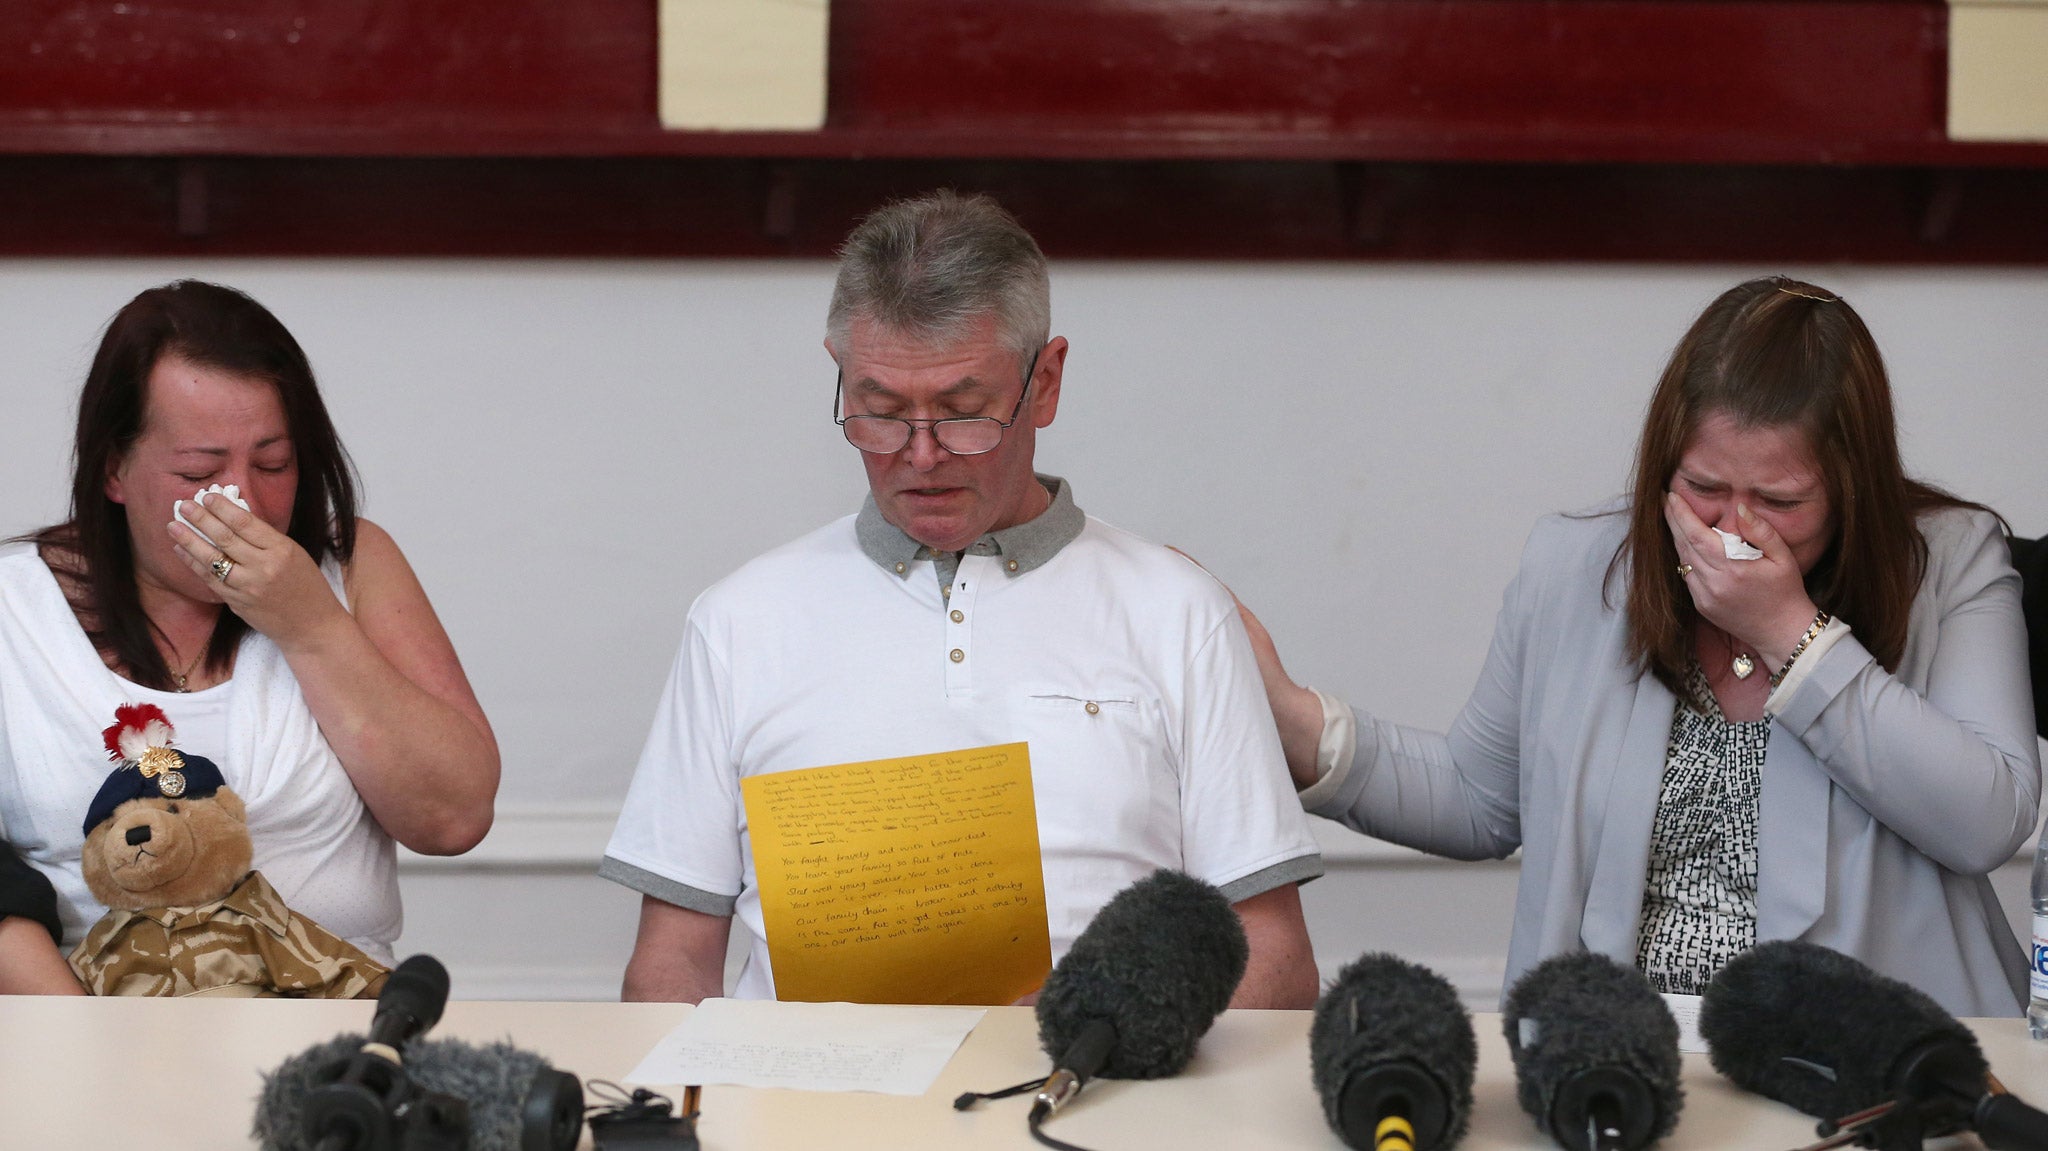 The mother and stepfather of murdered soldier Lee Rigby, Lyn and Ian Rigby and his wife Rebecca Rigby, grieve as his stepfather reads a family statement